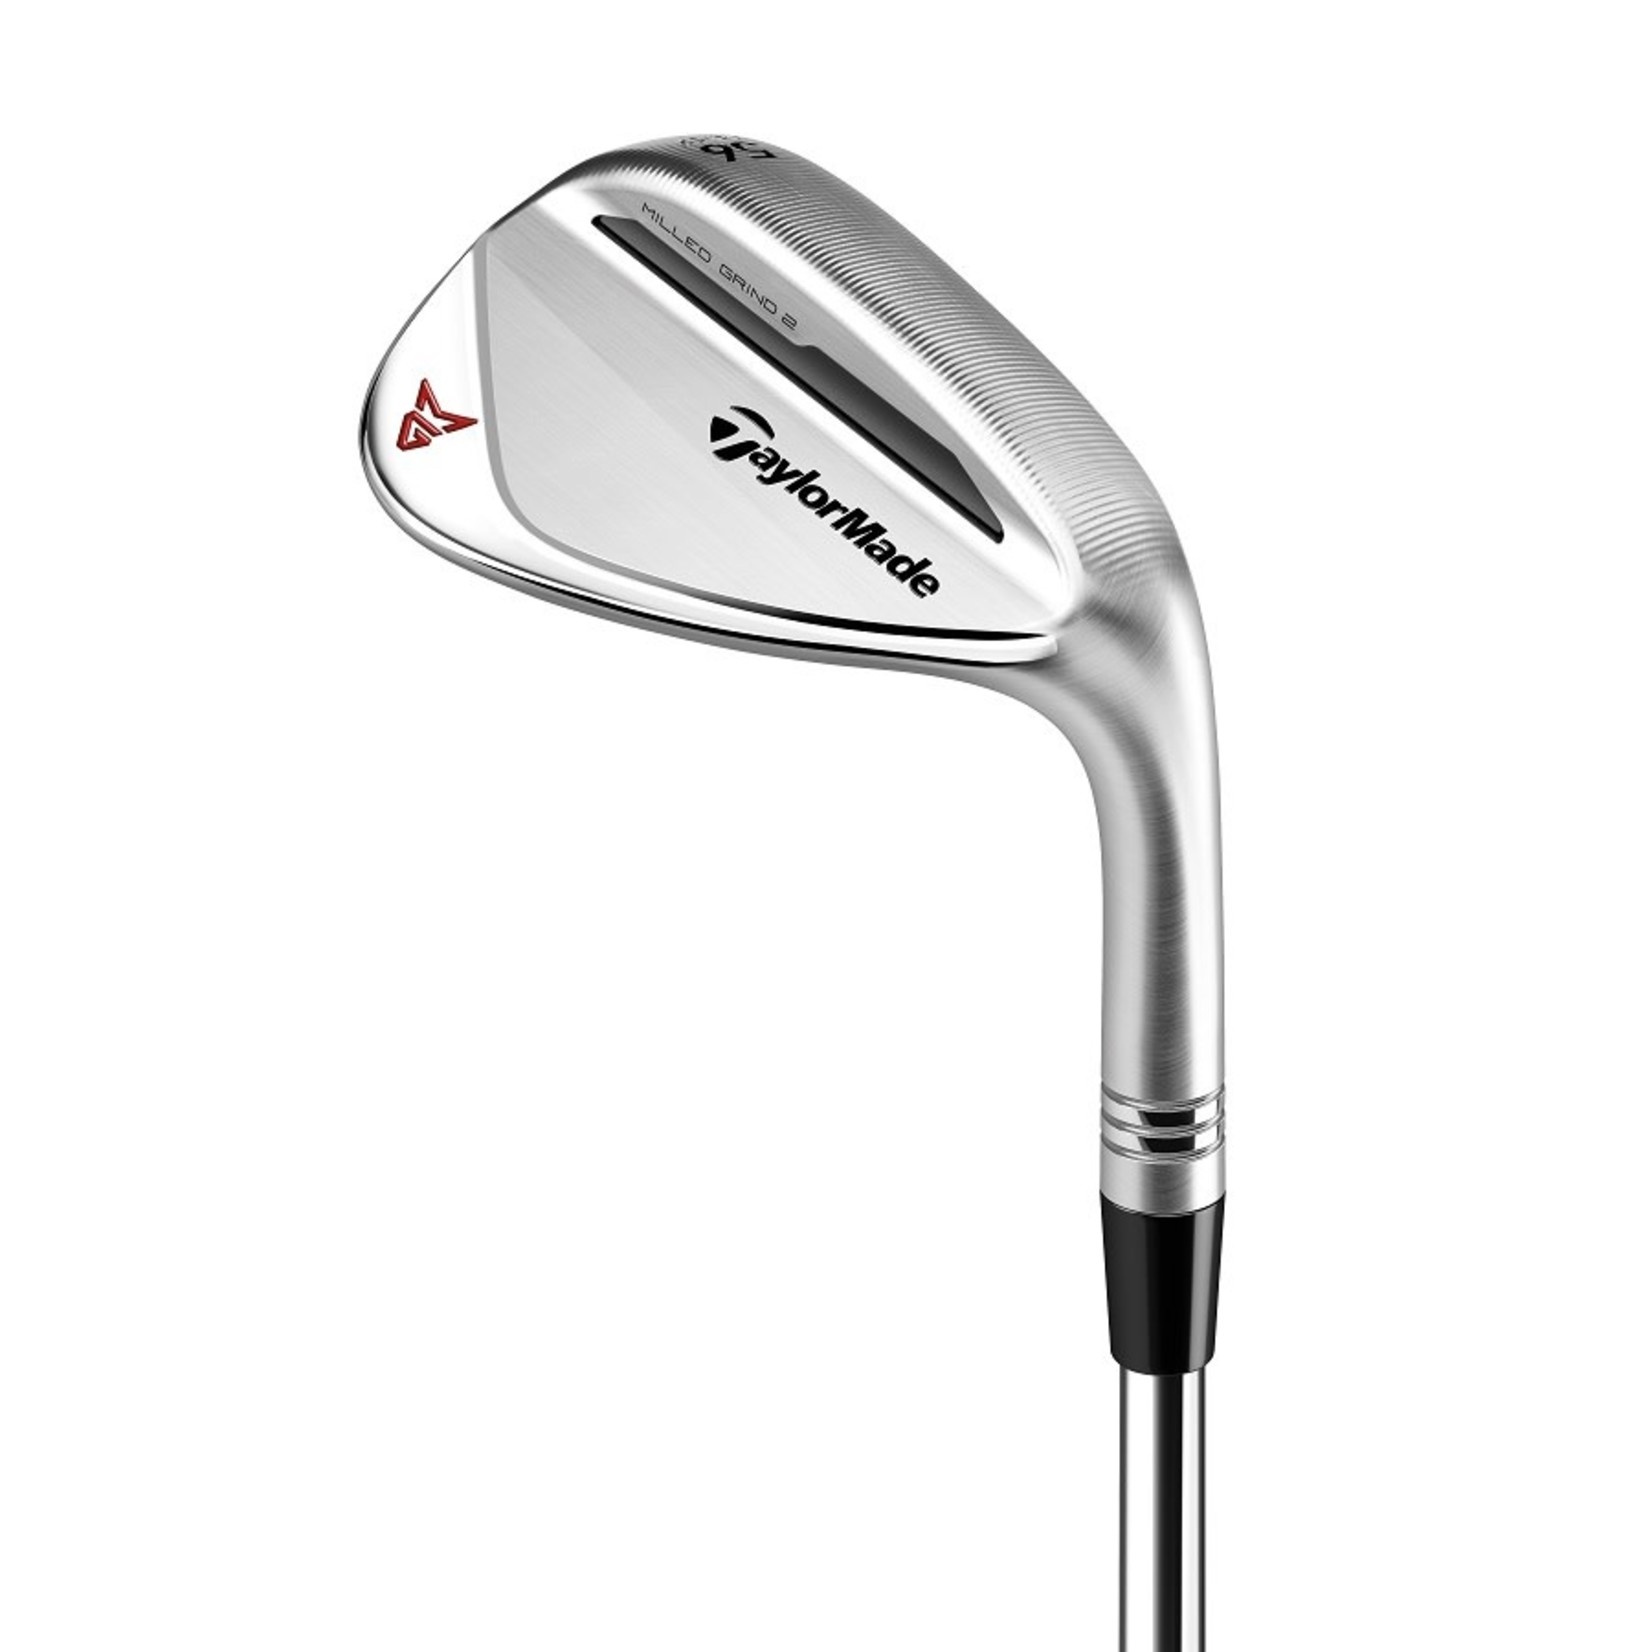 Taylor Made TaylorMade MG2 2.0 Wedge Chrome LH LEFTHANDED 56.12 graden